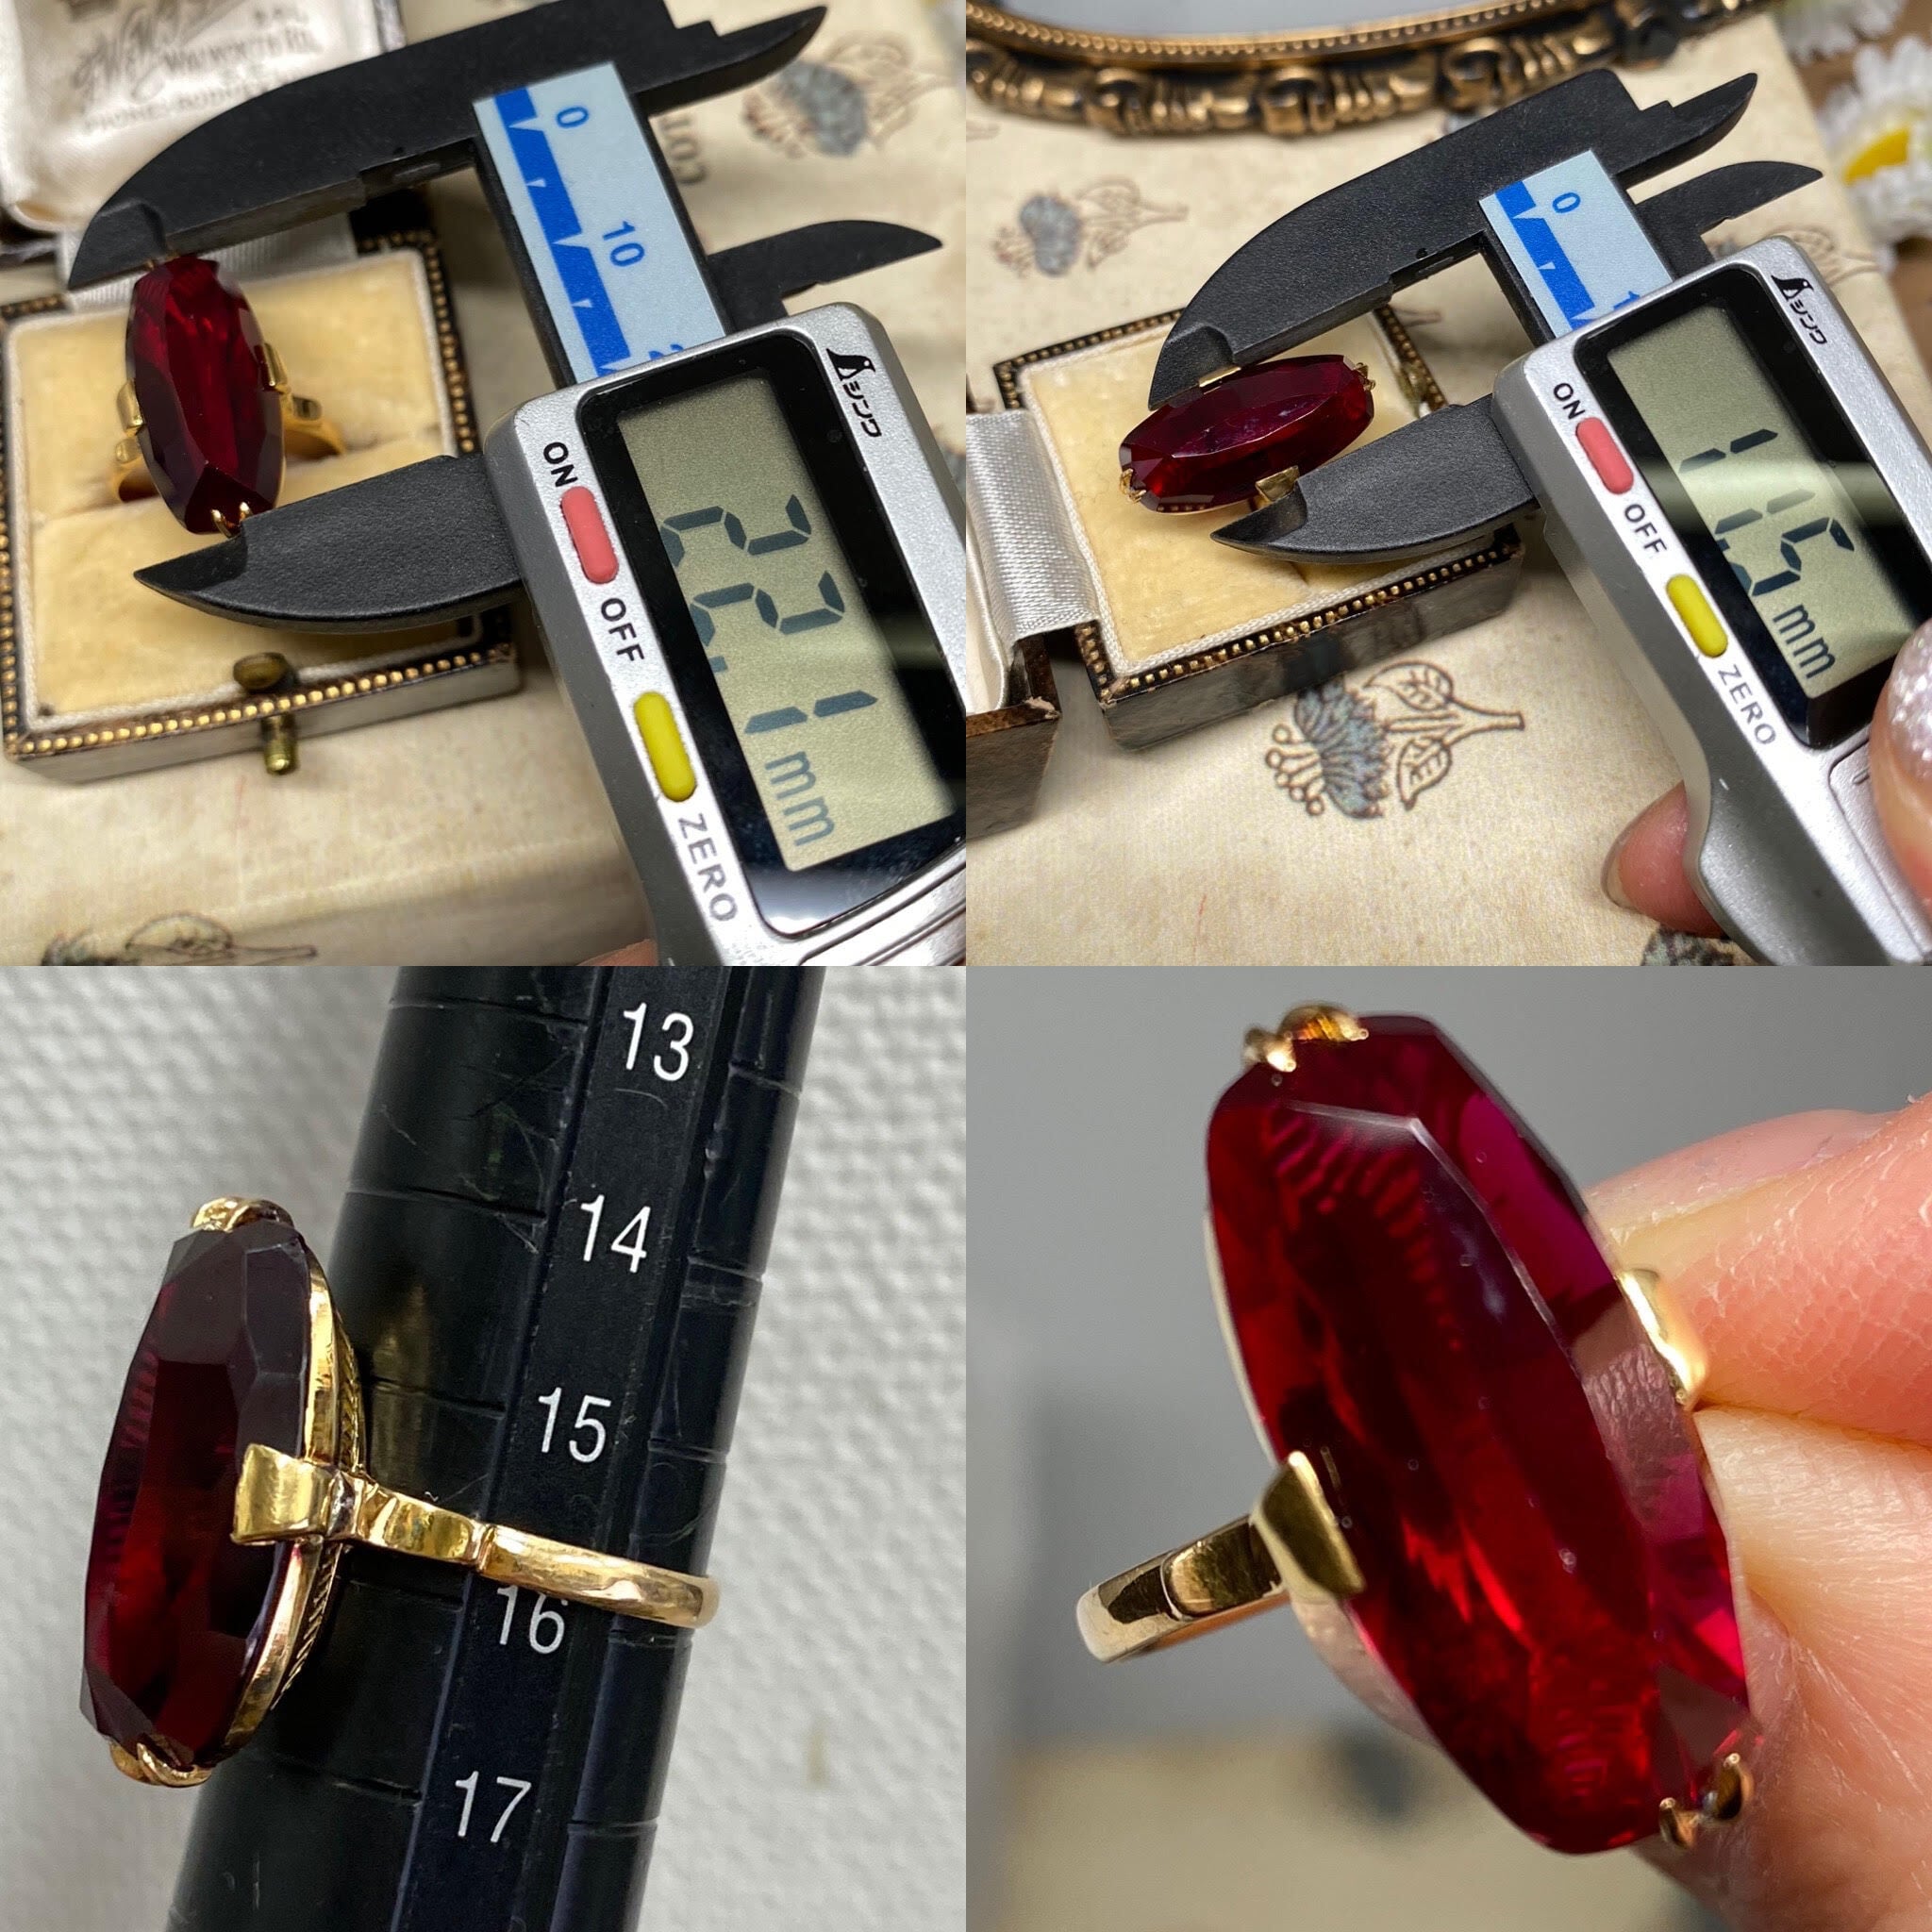 【Japanese traditional ring】昭和レトロリング 百貨店 松屋刻印あり